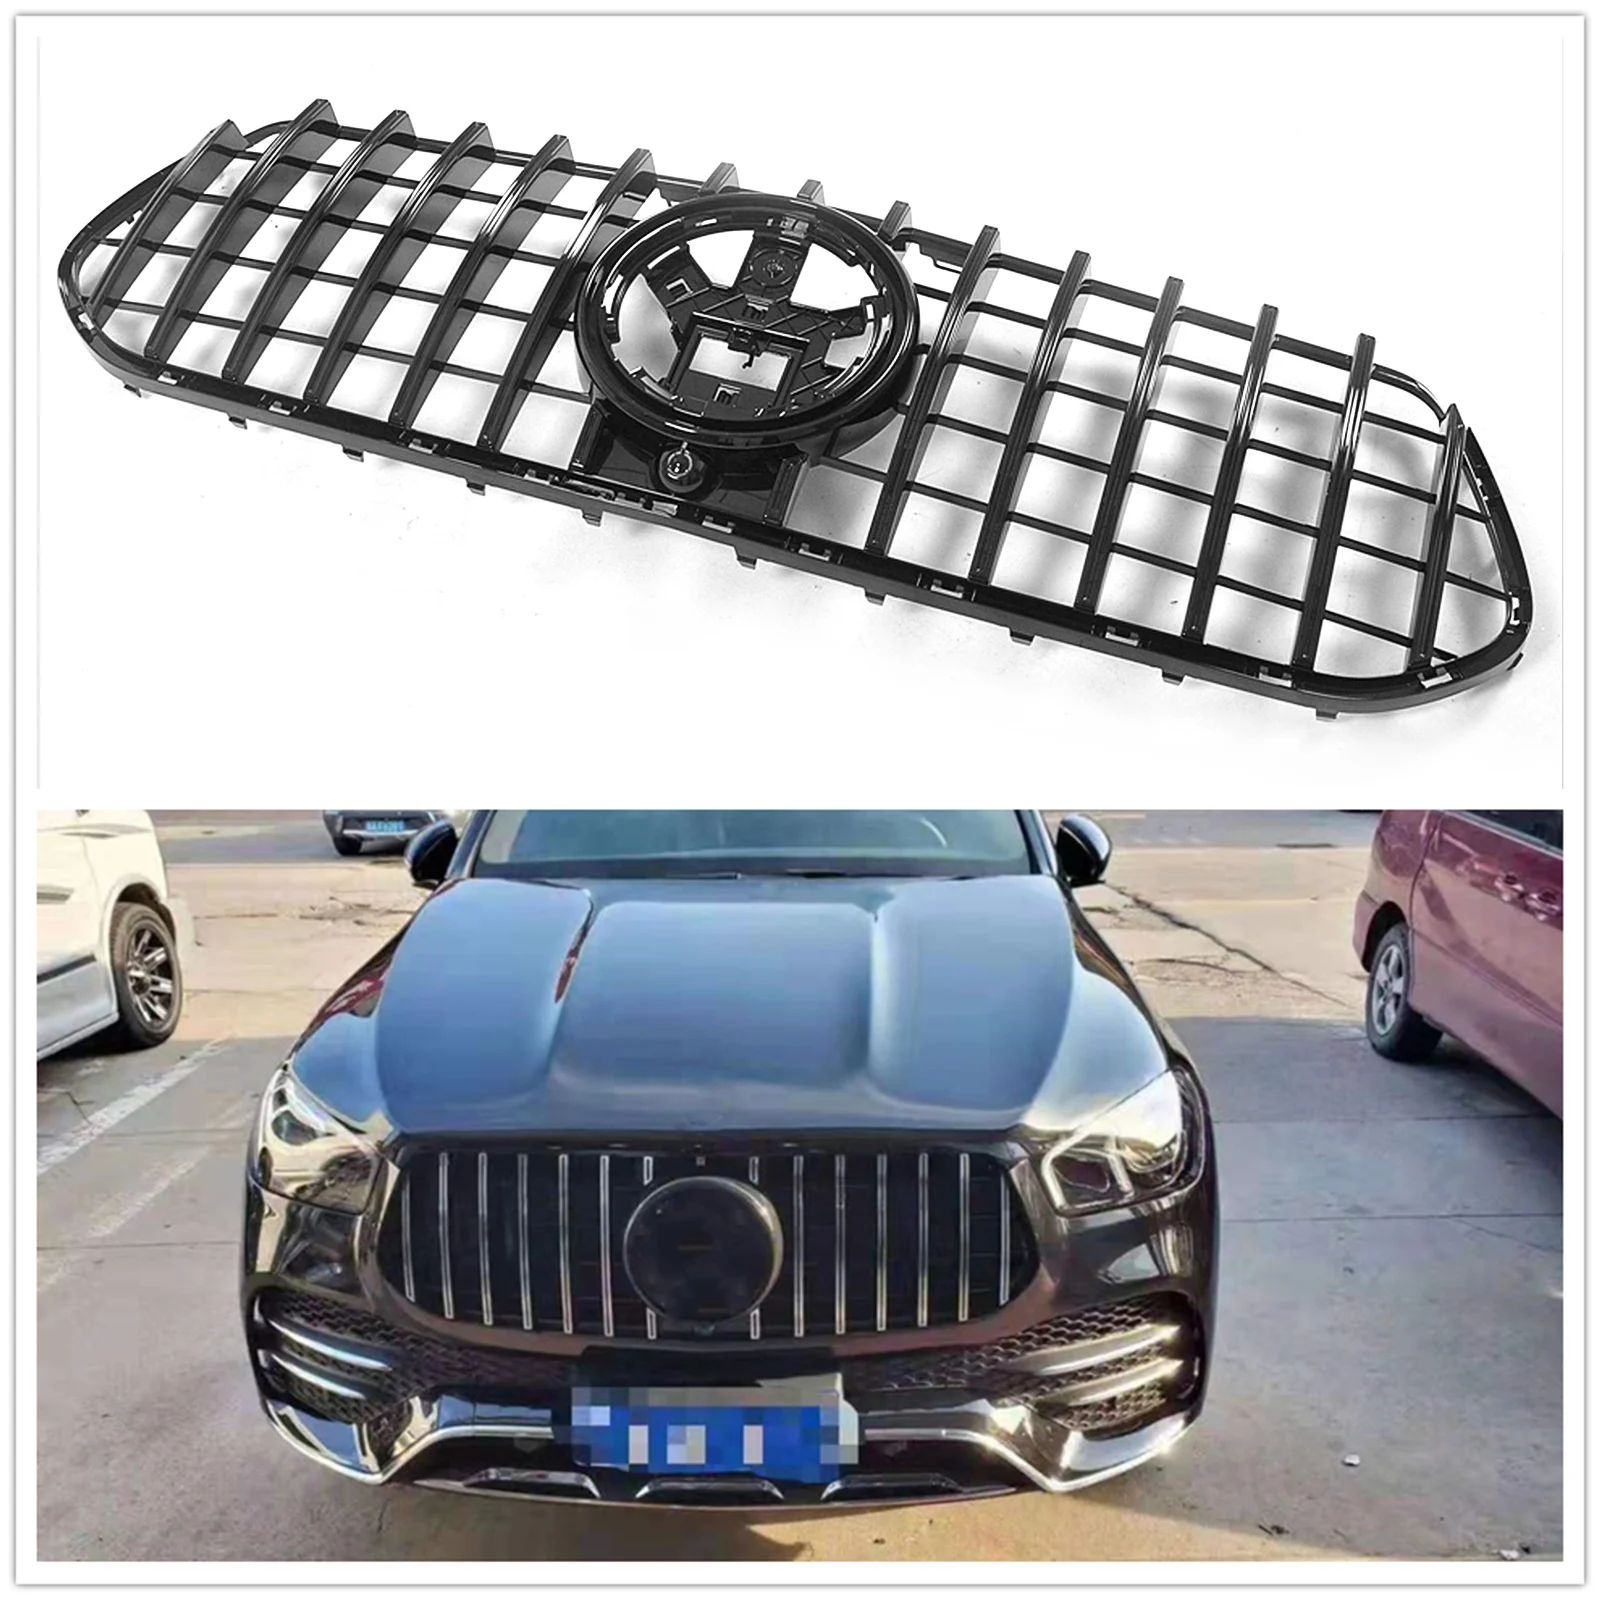 

Grill Front Grille For Mercedes Benz GLE Class SUV W167 2020-2023 Sport Model Only GT Black/Silver Upper Bumper Hood Mesh Grid